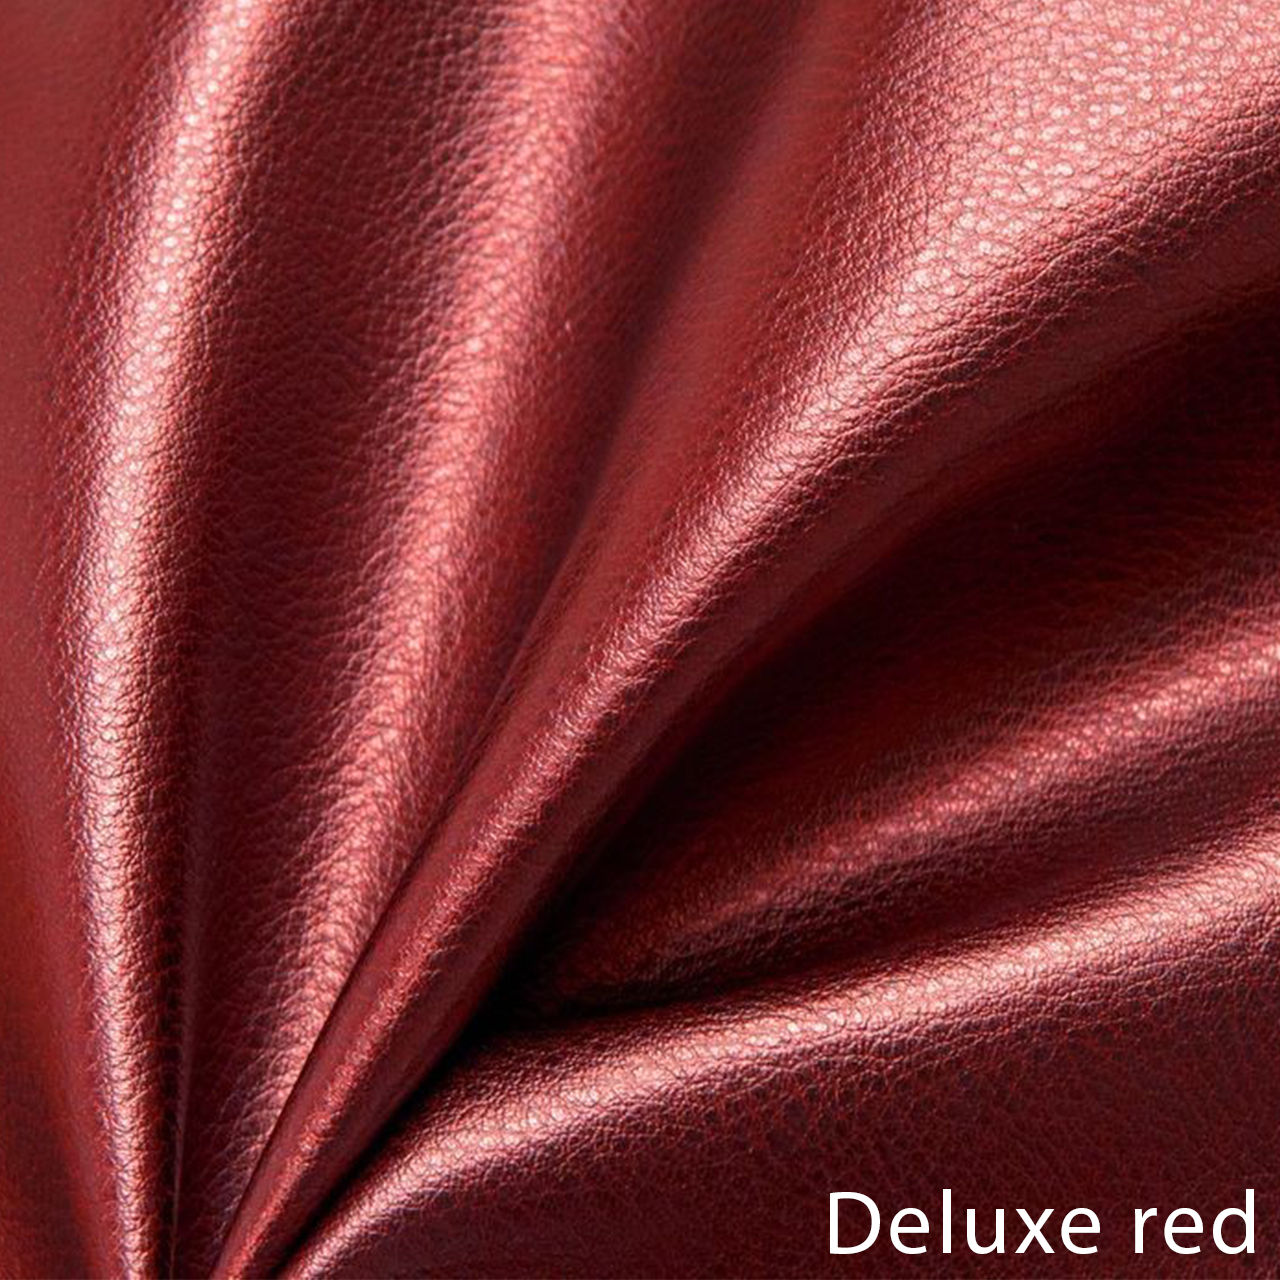 Deluxe red